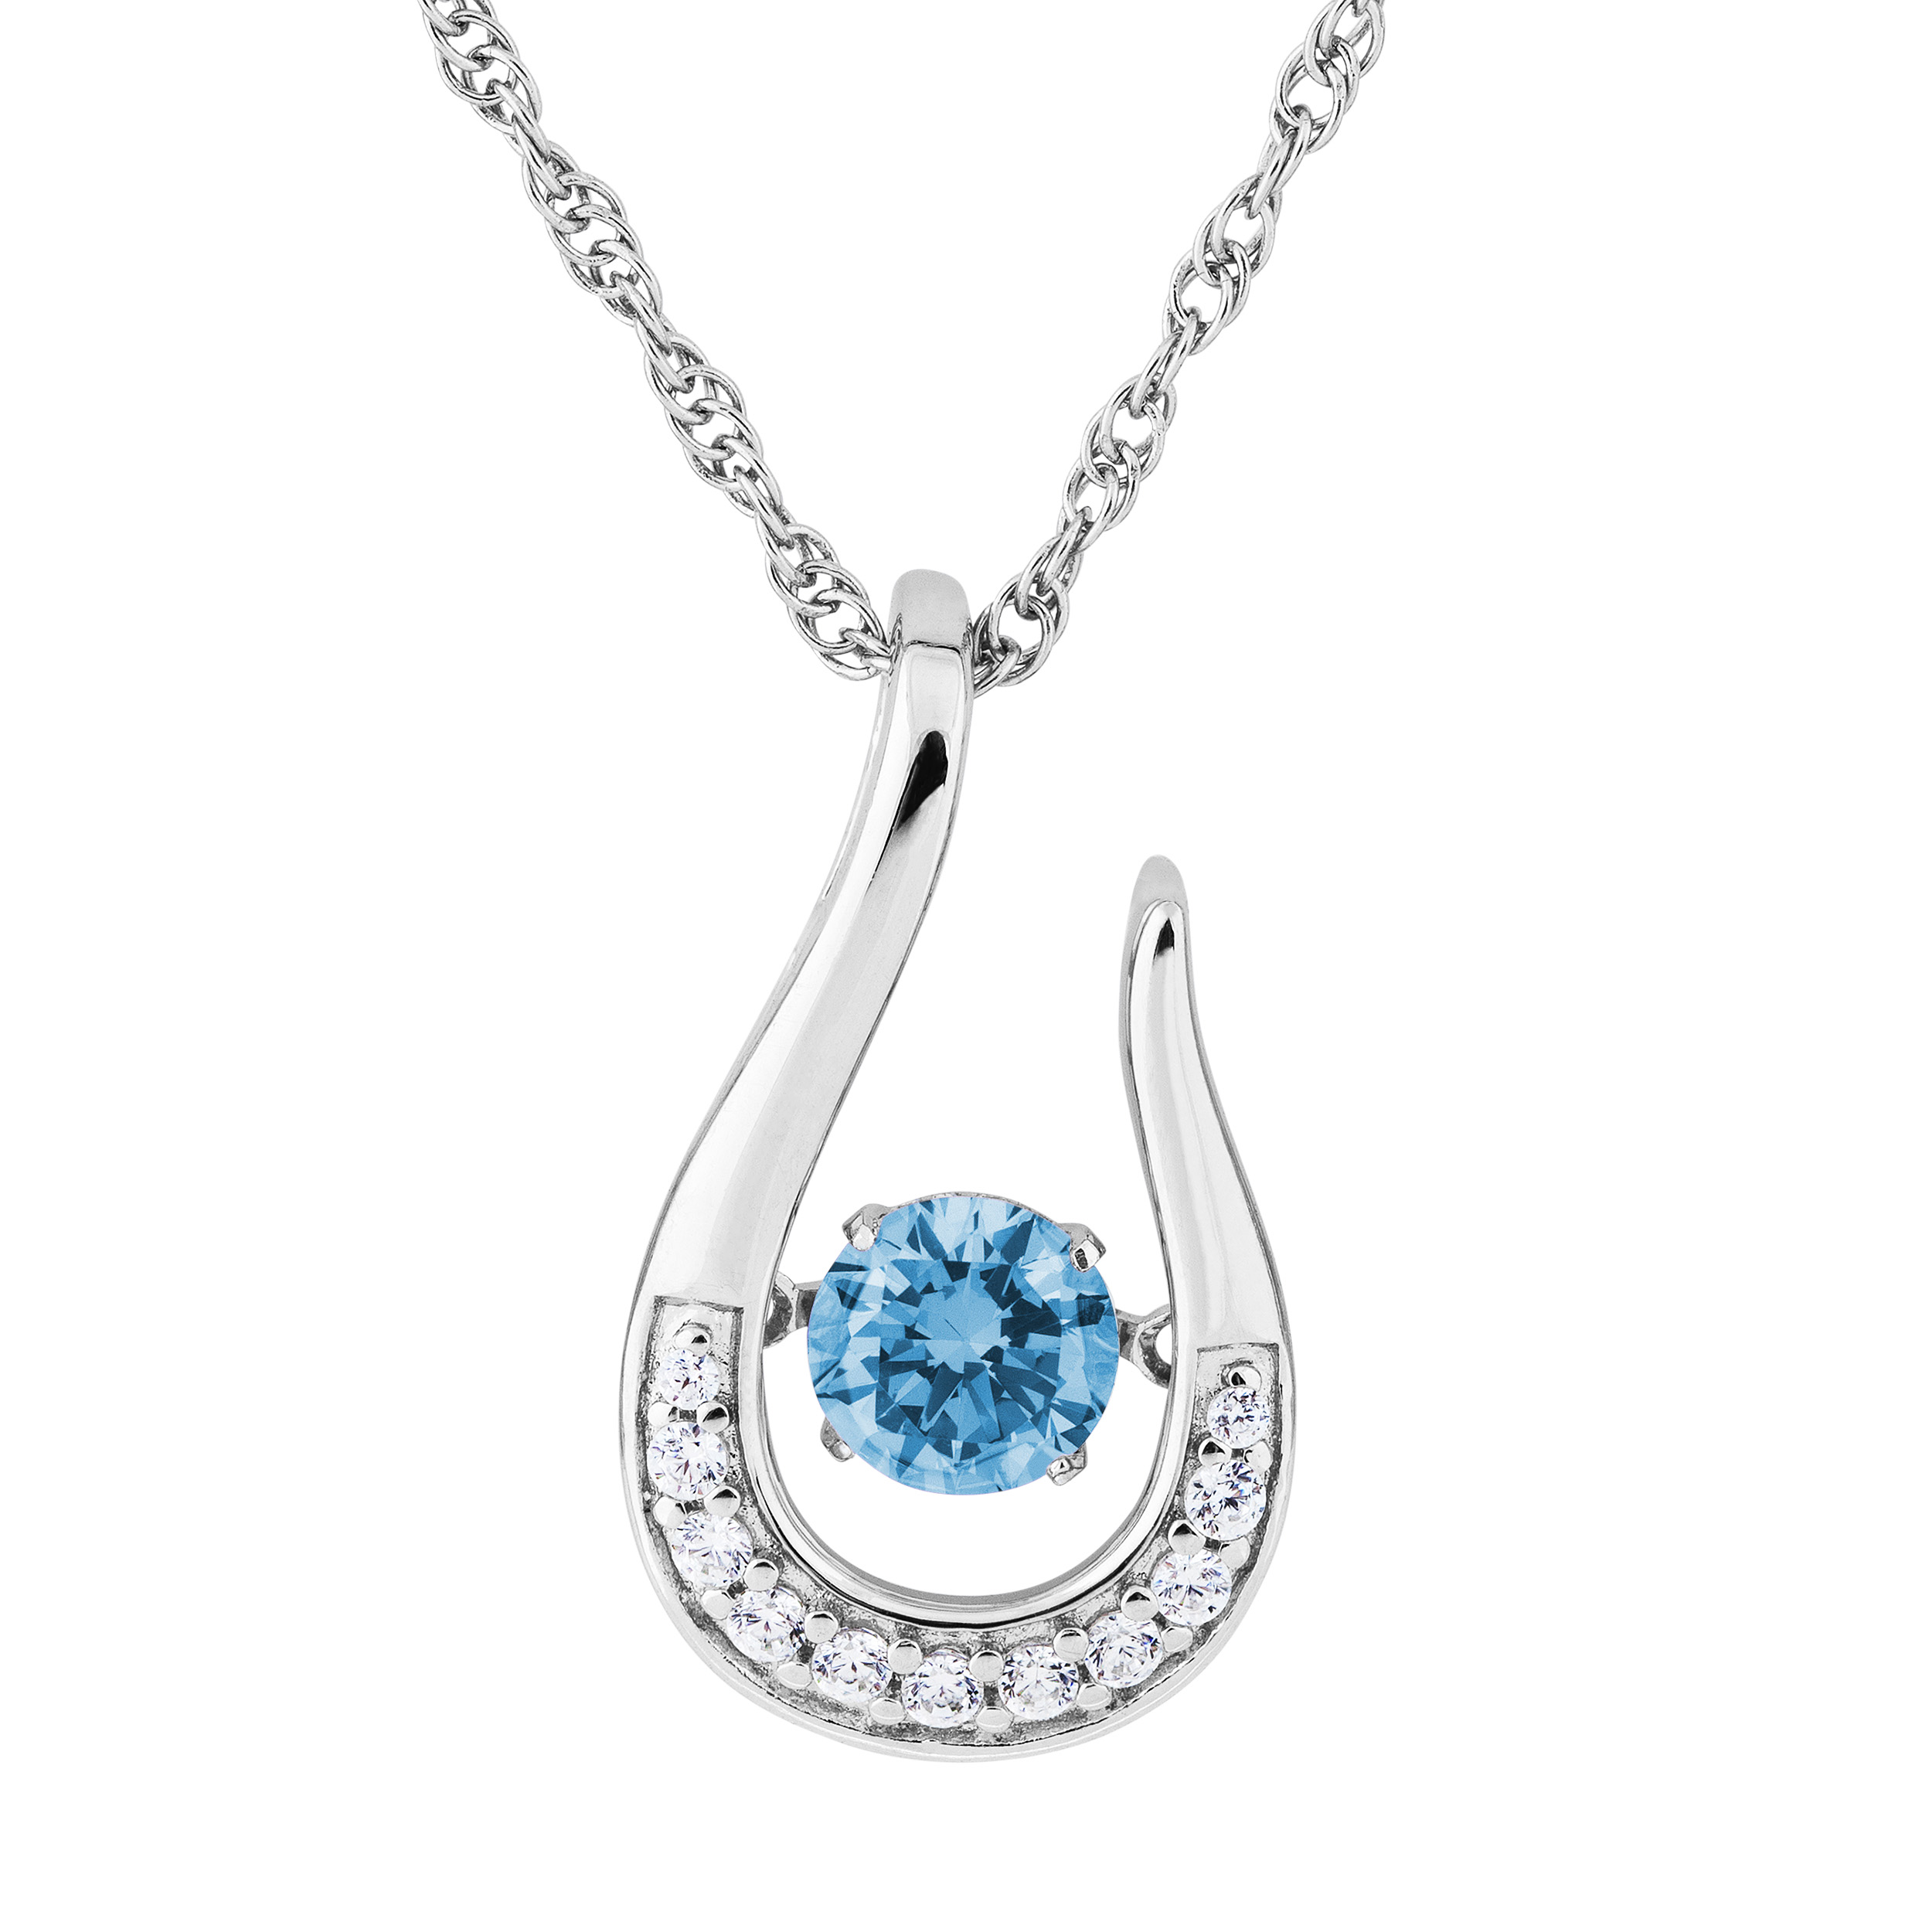 Blue Spinel CZ with Cubic Zirconia December Teardrop Pendant Necklace, Rhodium Plated Sterling Silver